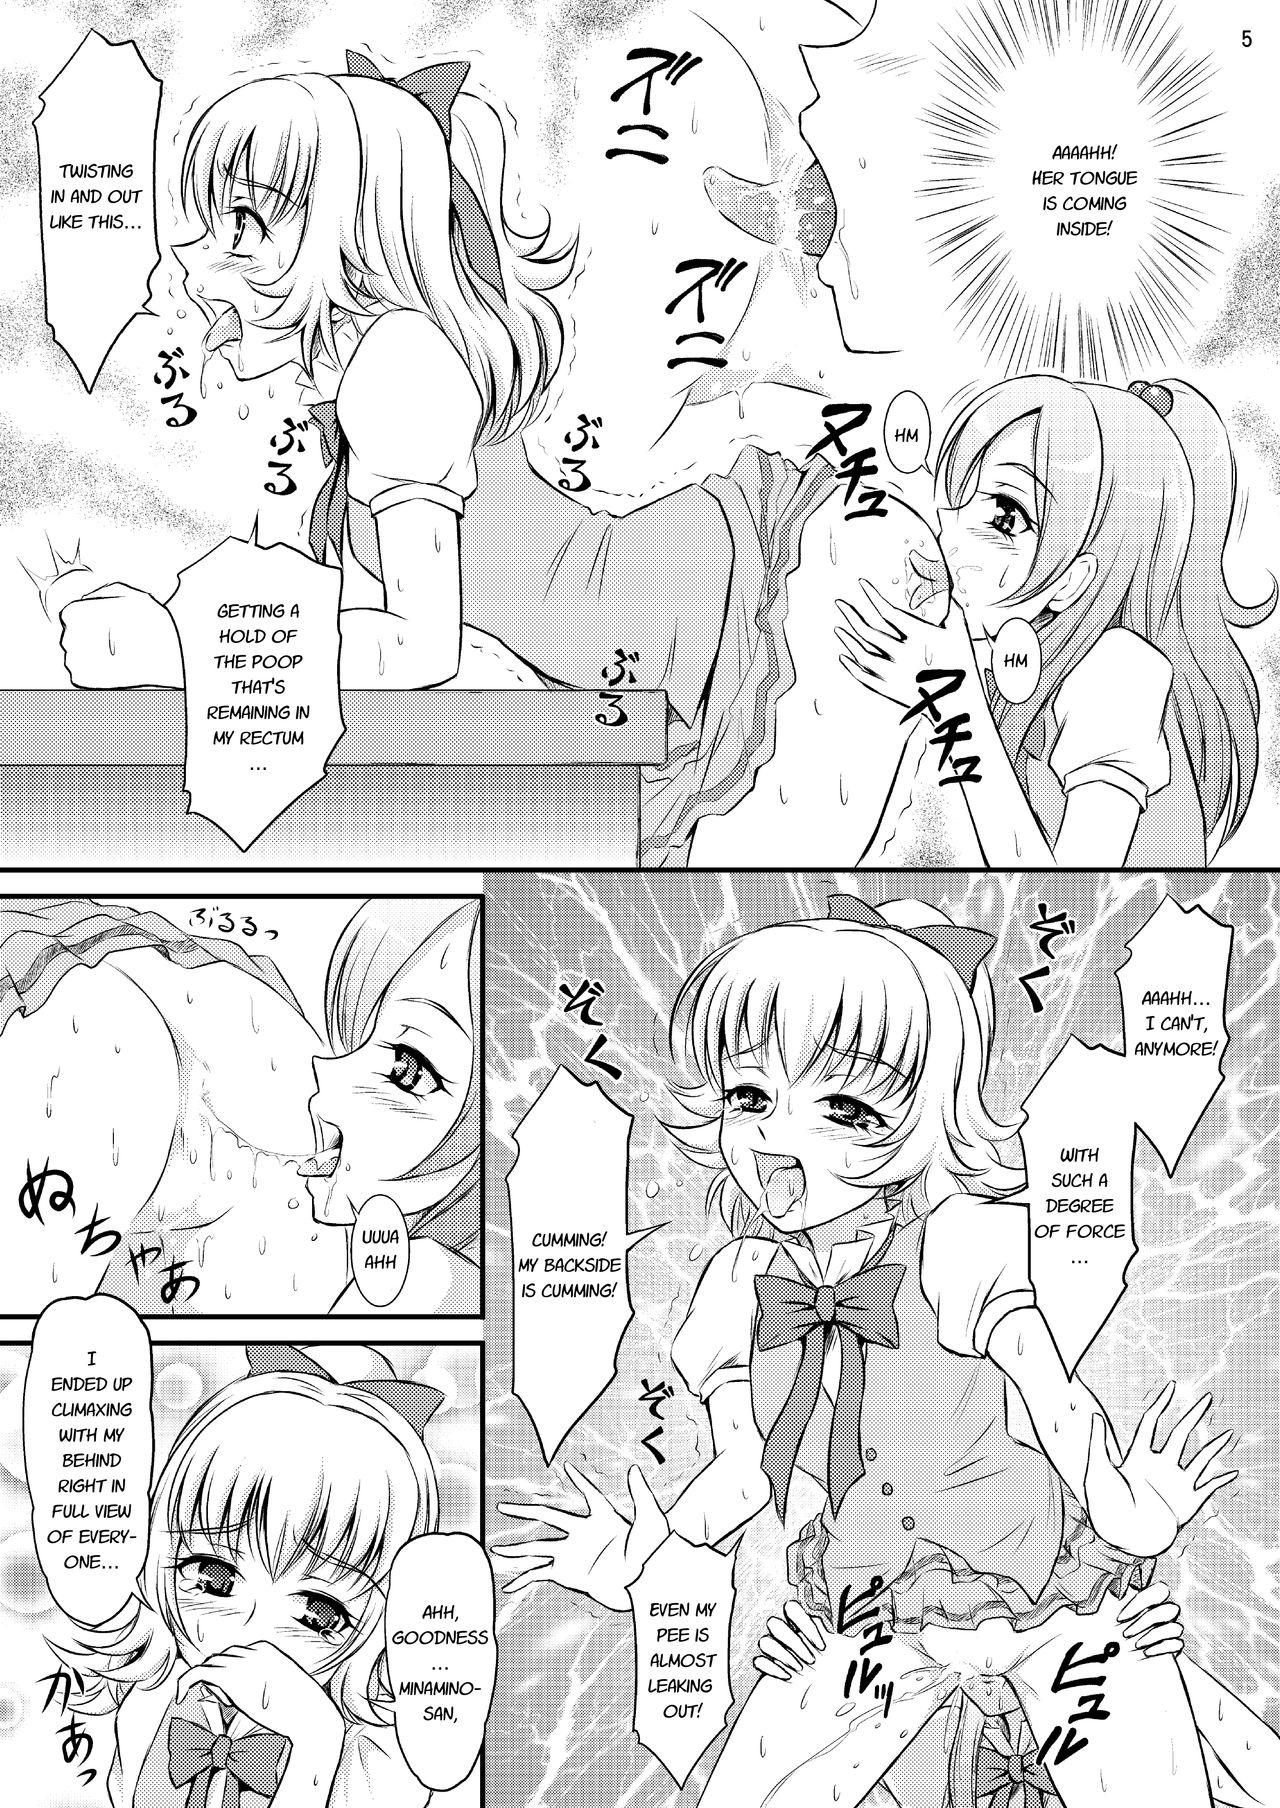 Nasty Free Porn Sweets' Hime no Himitsu Recipe - Suite precure Topless - Page 6